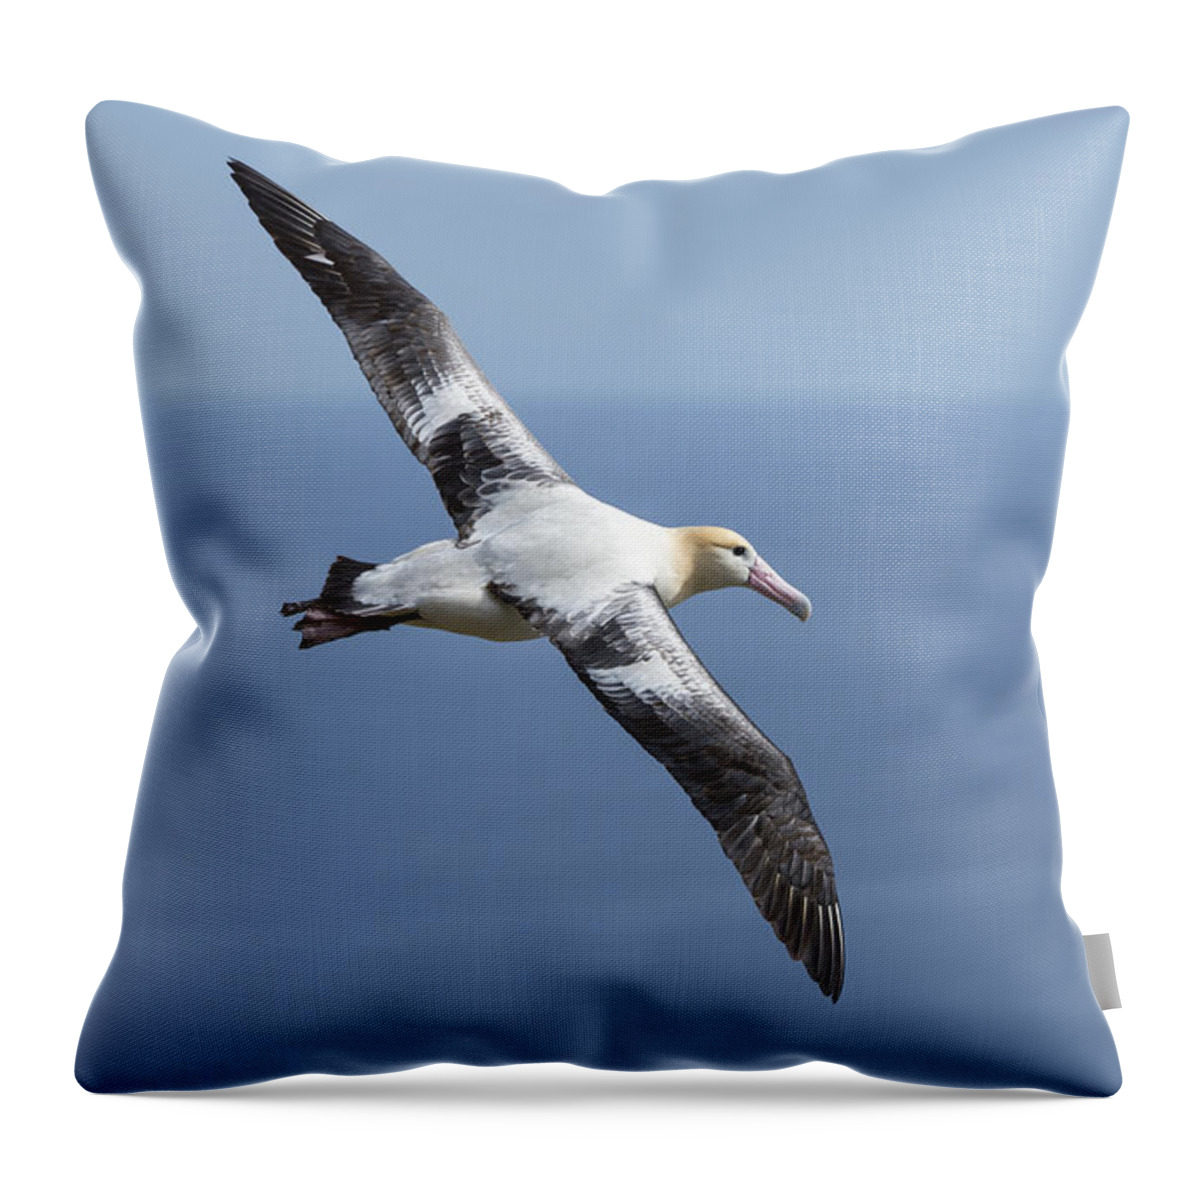 536915 Throw Pillow featuring the photograph Short-tailed Albatross Flying Torishima #5 by Tui De Roy